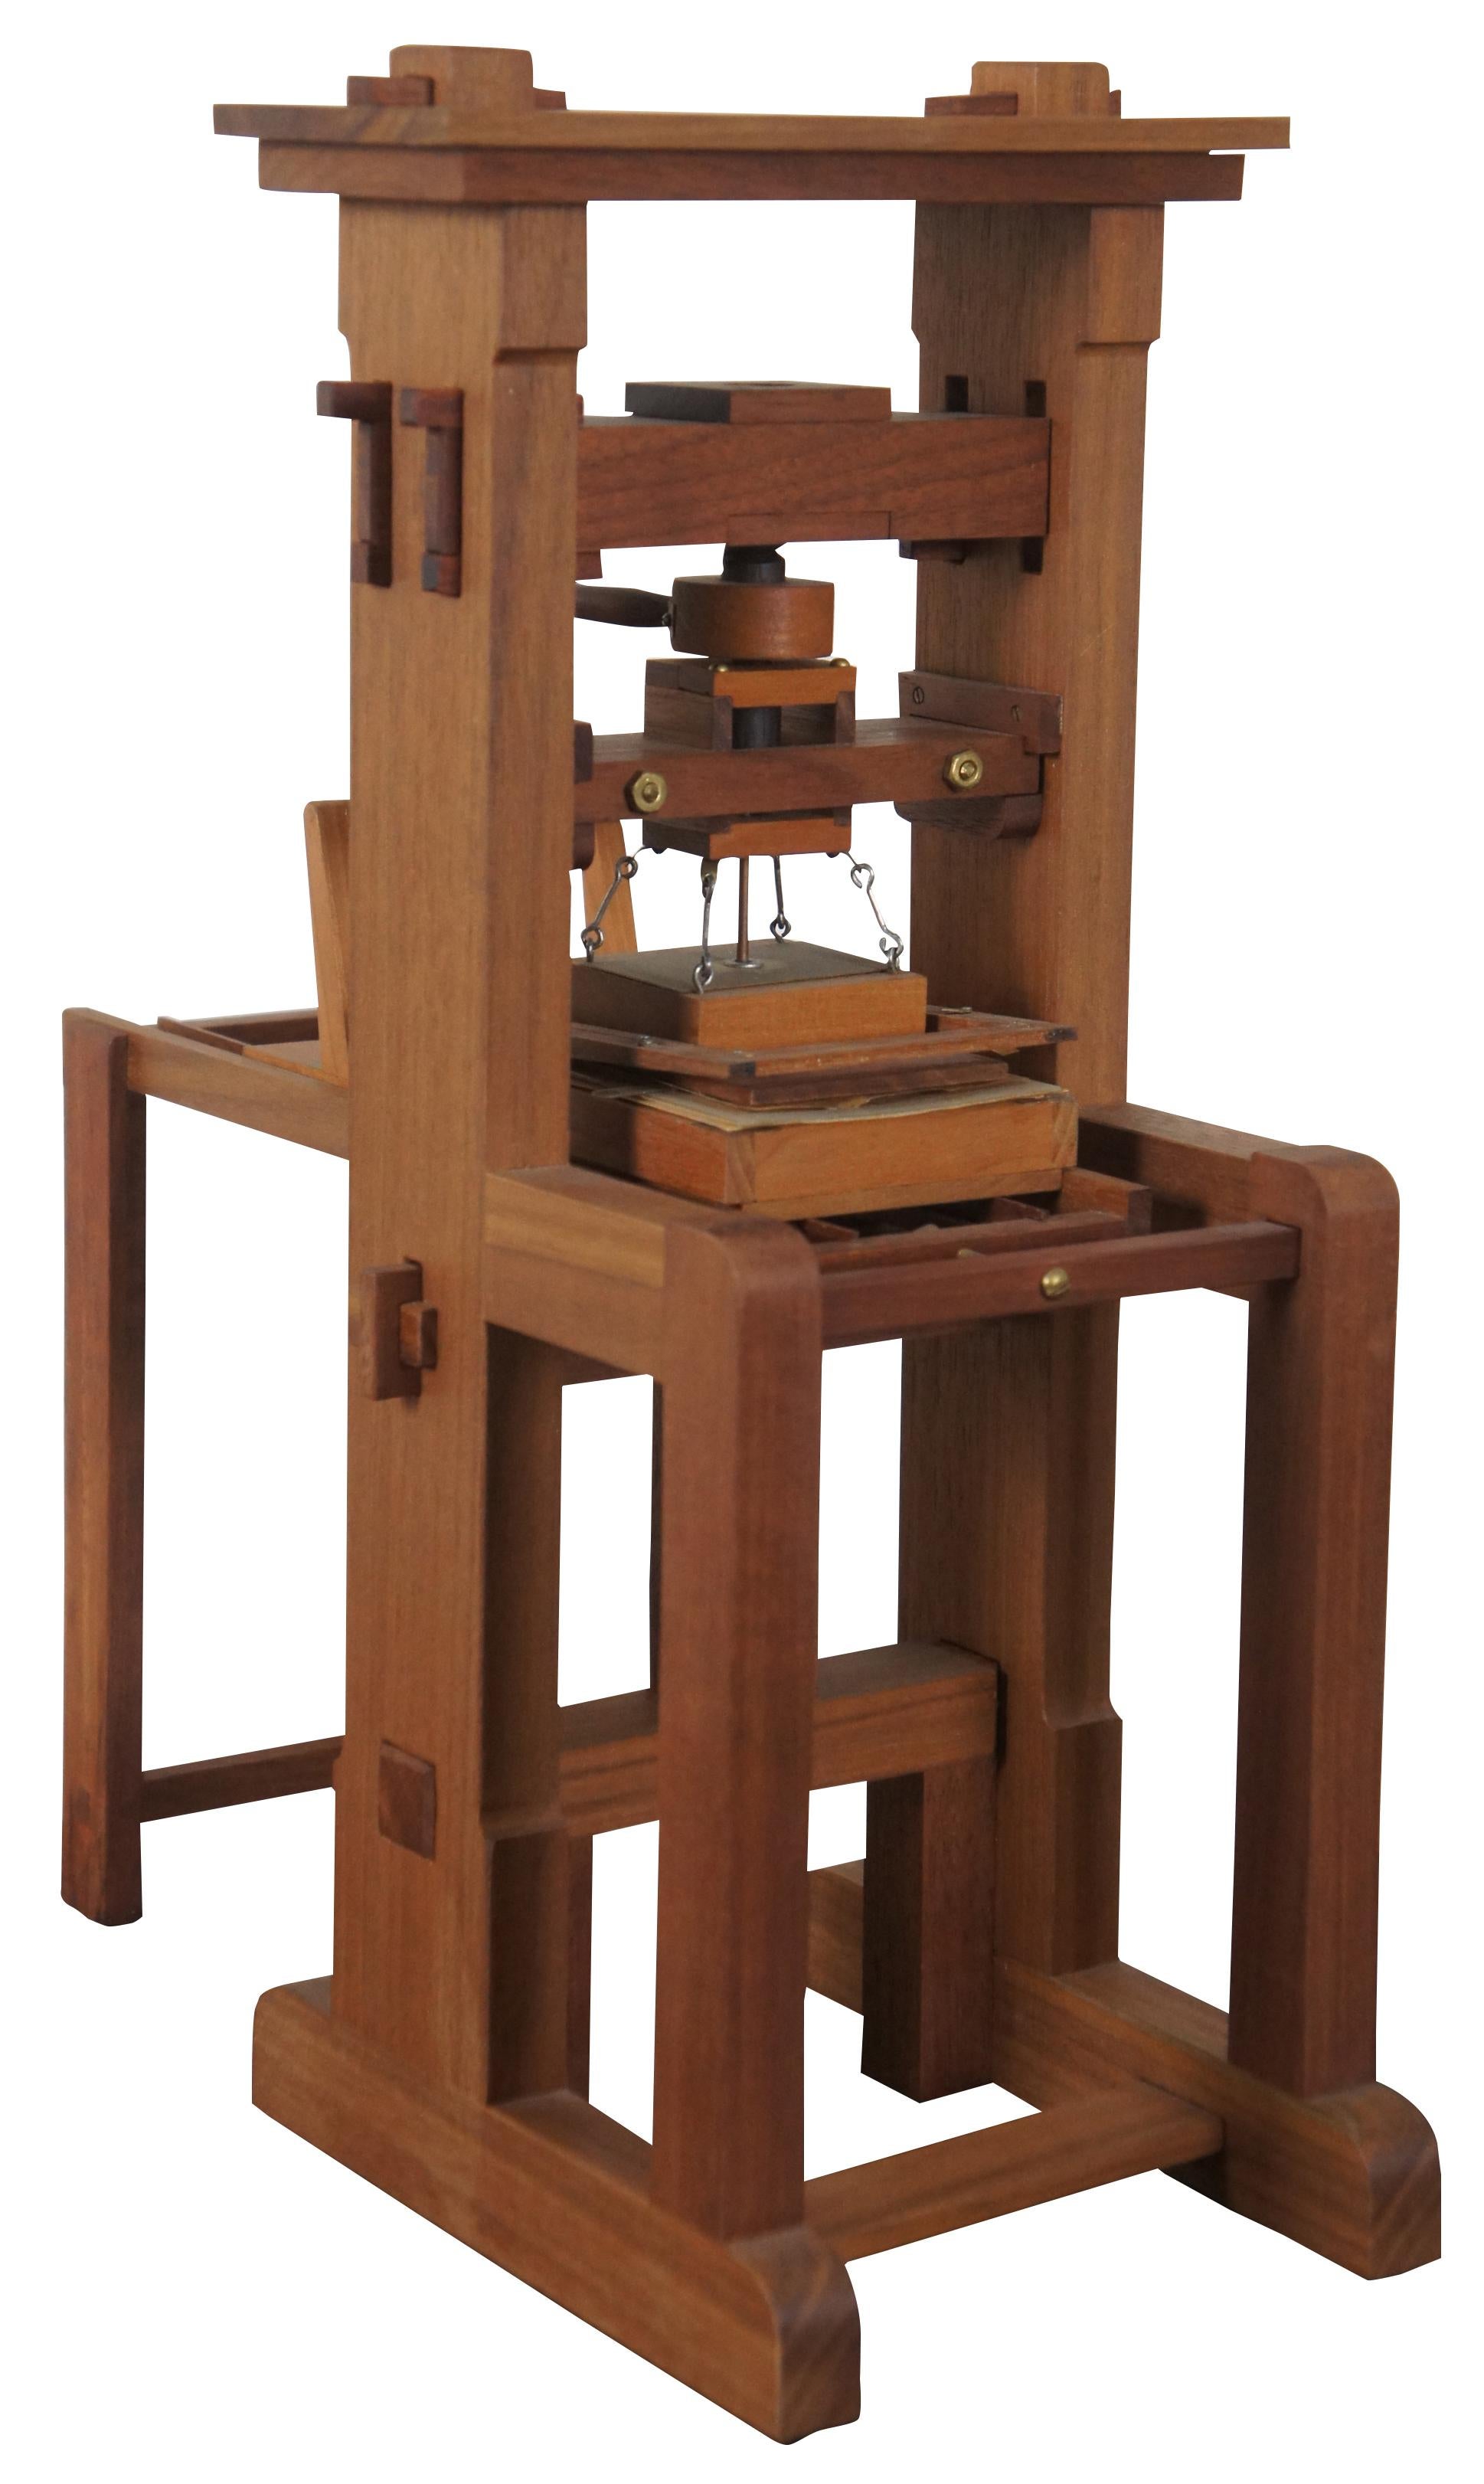 Vintage 1989 ¼ scale model Gutenberg printing press from the miniature book society’s conclave seven keepsake, including linoleum block print made by Kalman L. Levitan. Measures: 17